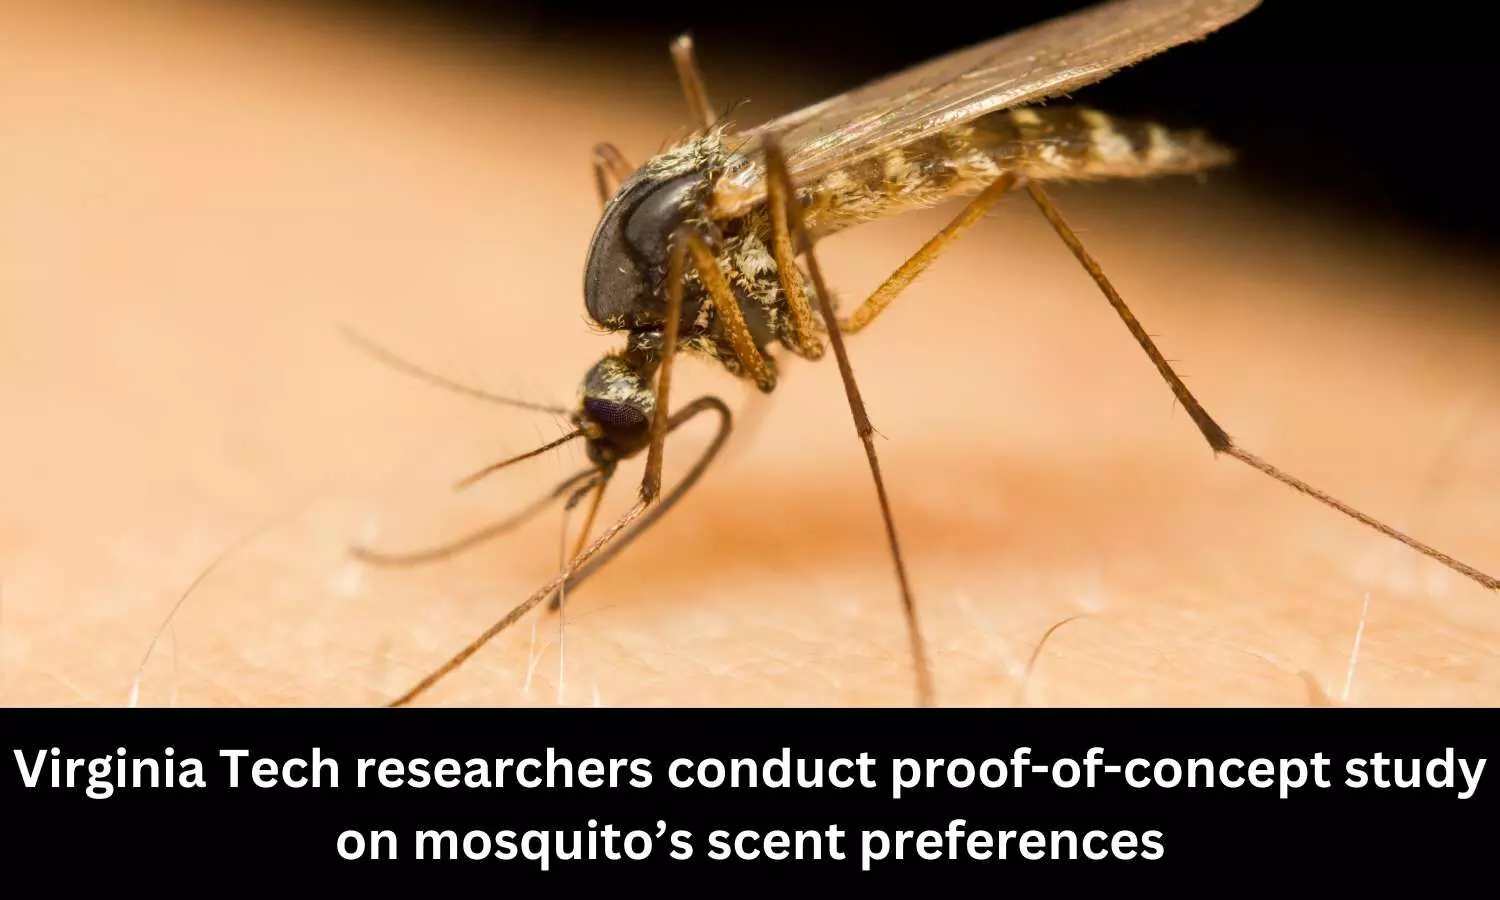 Virginia Tech researchers conduct proof-of-concept study on mosquito’s scent preferences